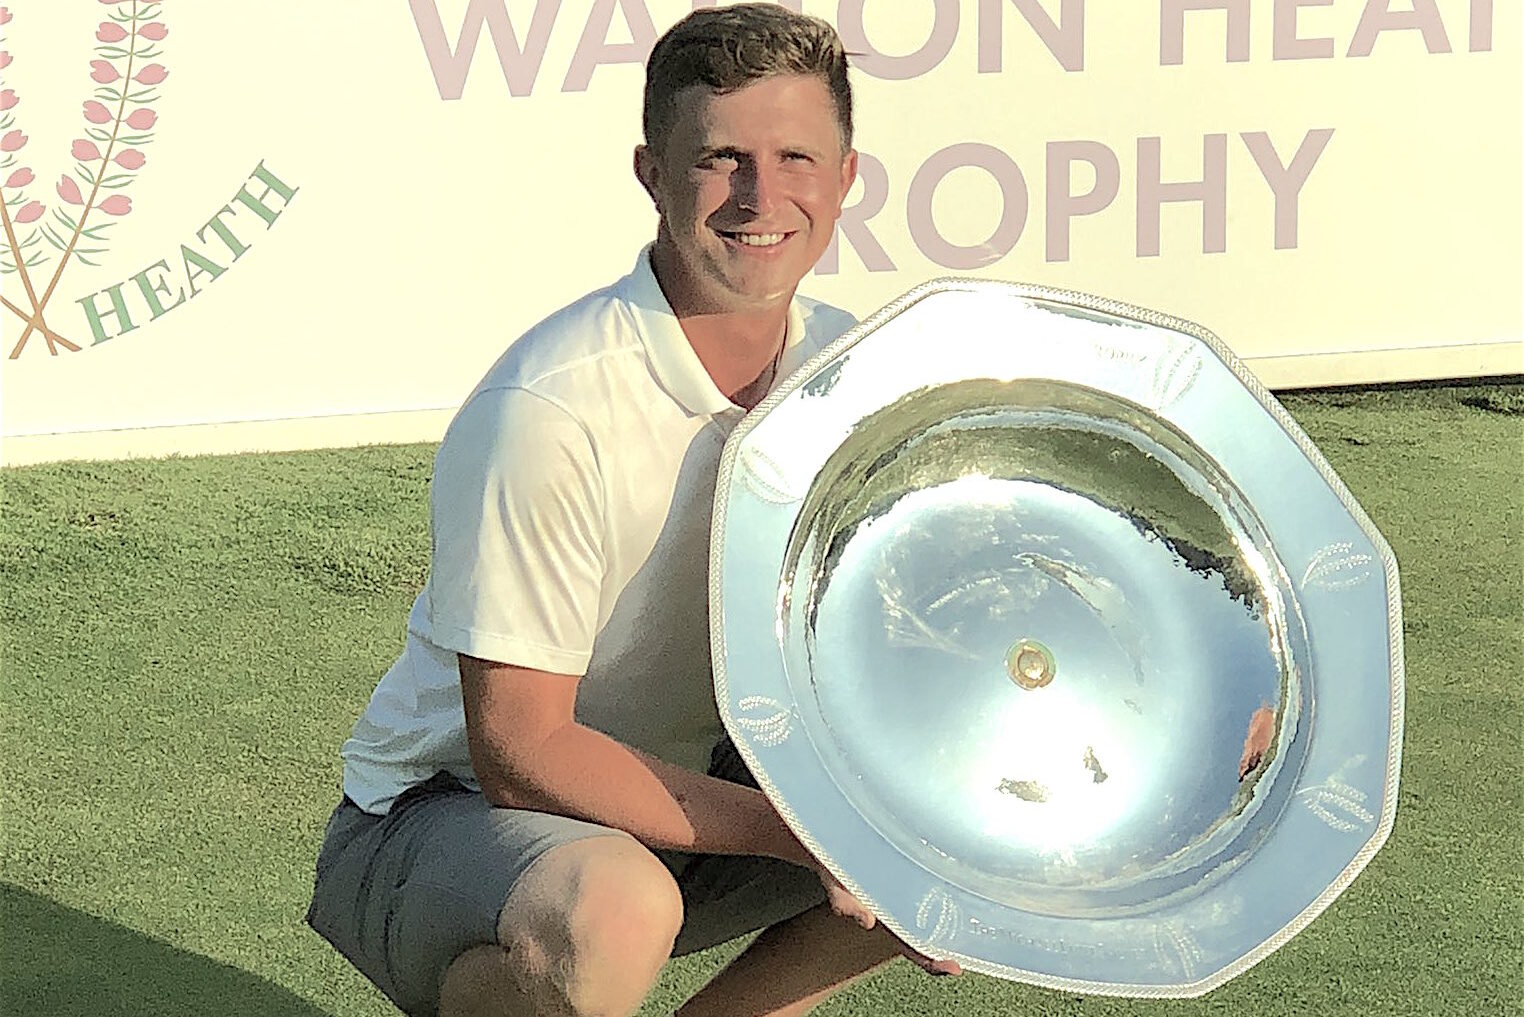 OUT OF THE SHADOWS: Rhys Nevin delivered a career performance by dominating at the Walton Heath Trophy